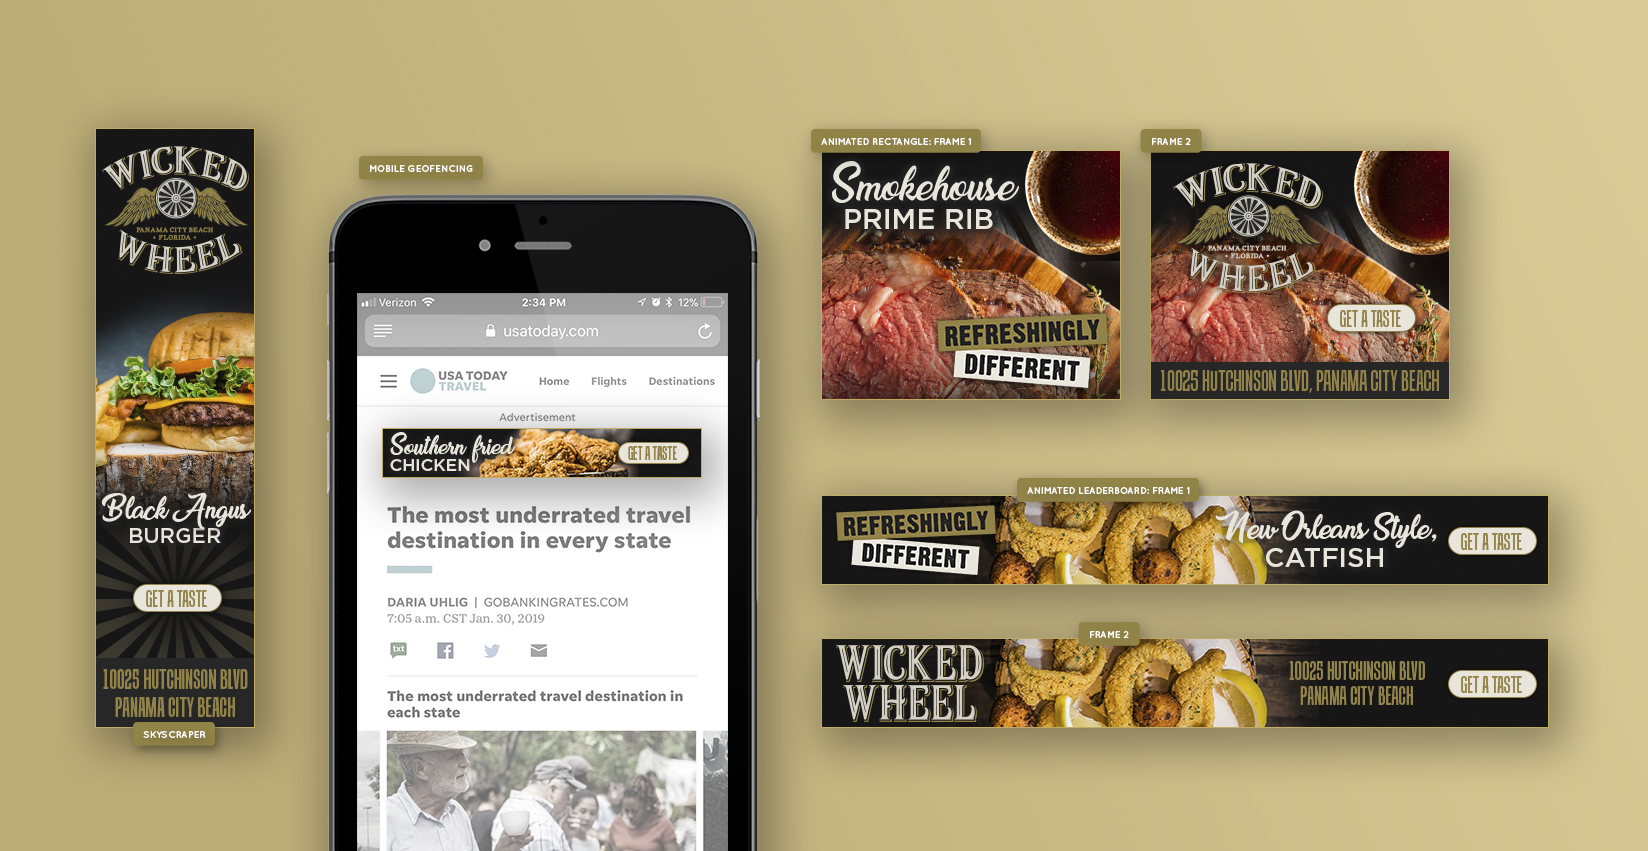 Refreshingly Different Digital Campaign for The Wicked Wheel ADDY award submission.